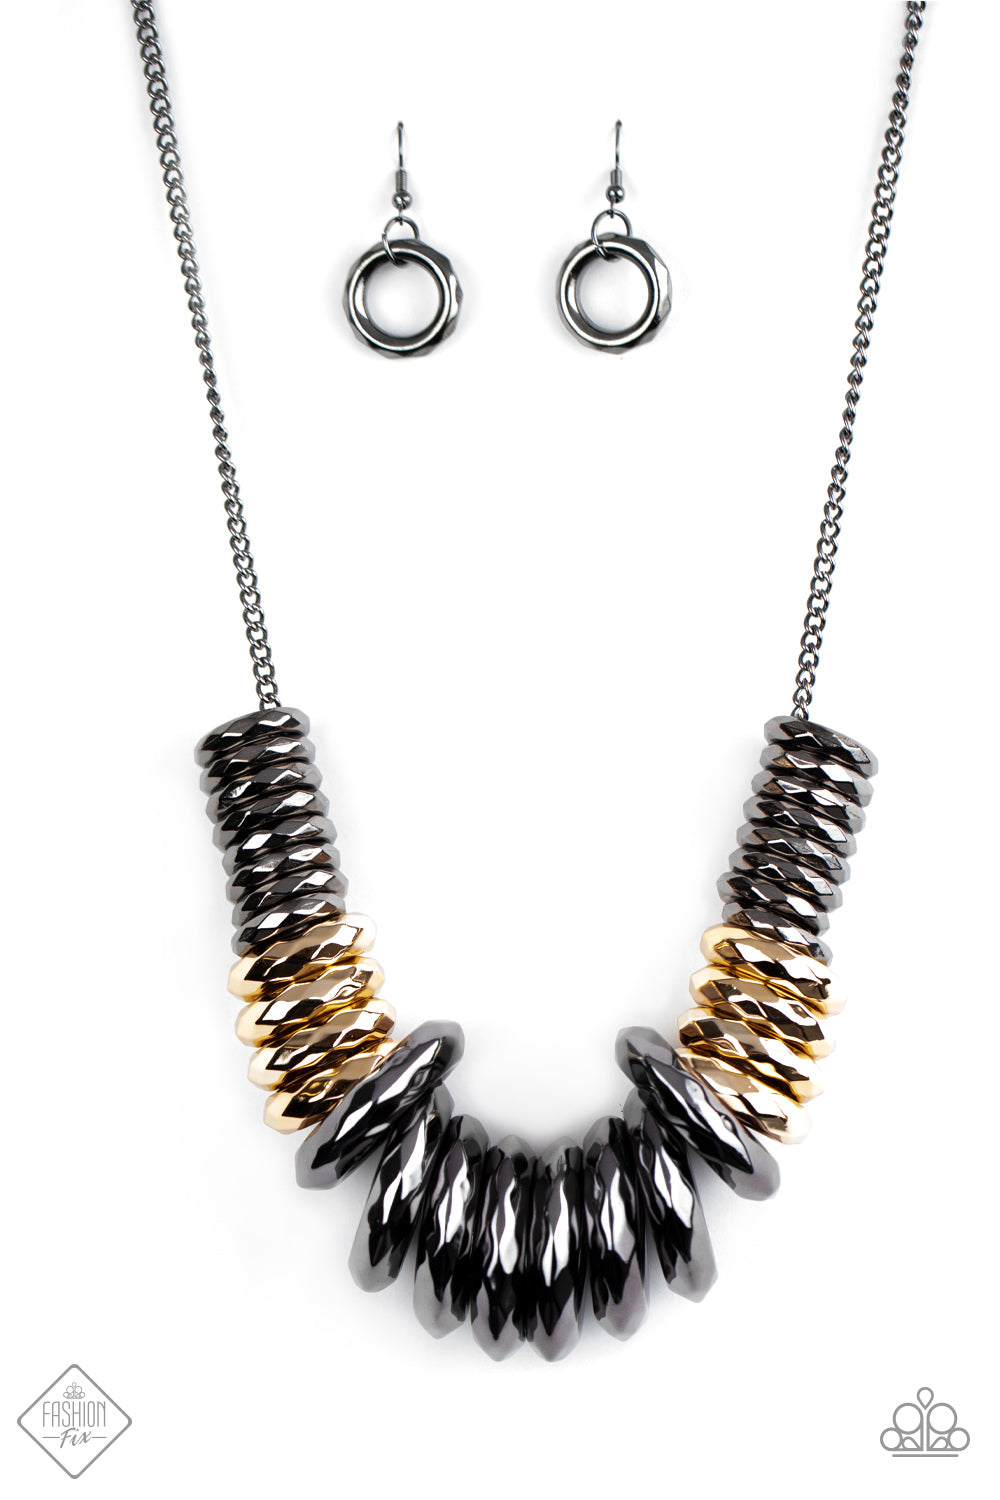 Haute Hardware - Gold and Gunmetal Necklace - Paparazzi Accessories - Gradually increasing in size, a collision of faceted gunmetal and gold rings slides along a classic gunmetal chain below the collar, creating a bold industrial statement piece. Features an adjustable clasp closure. Sold as one individual necklace.